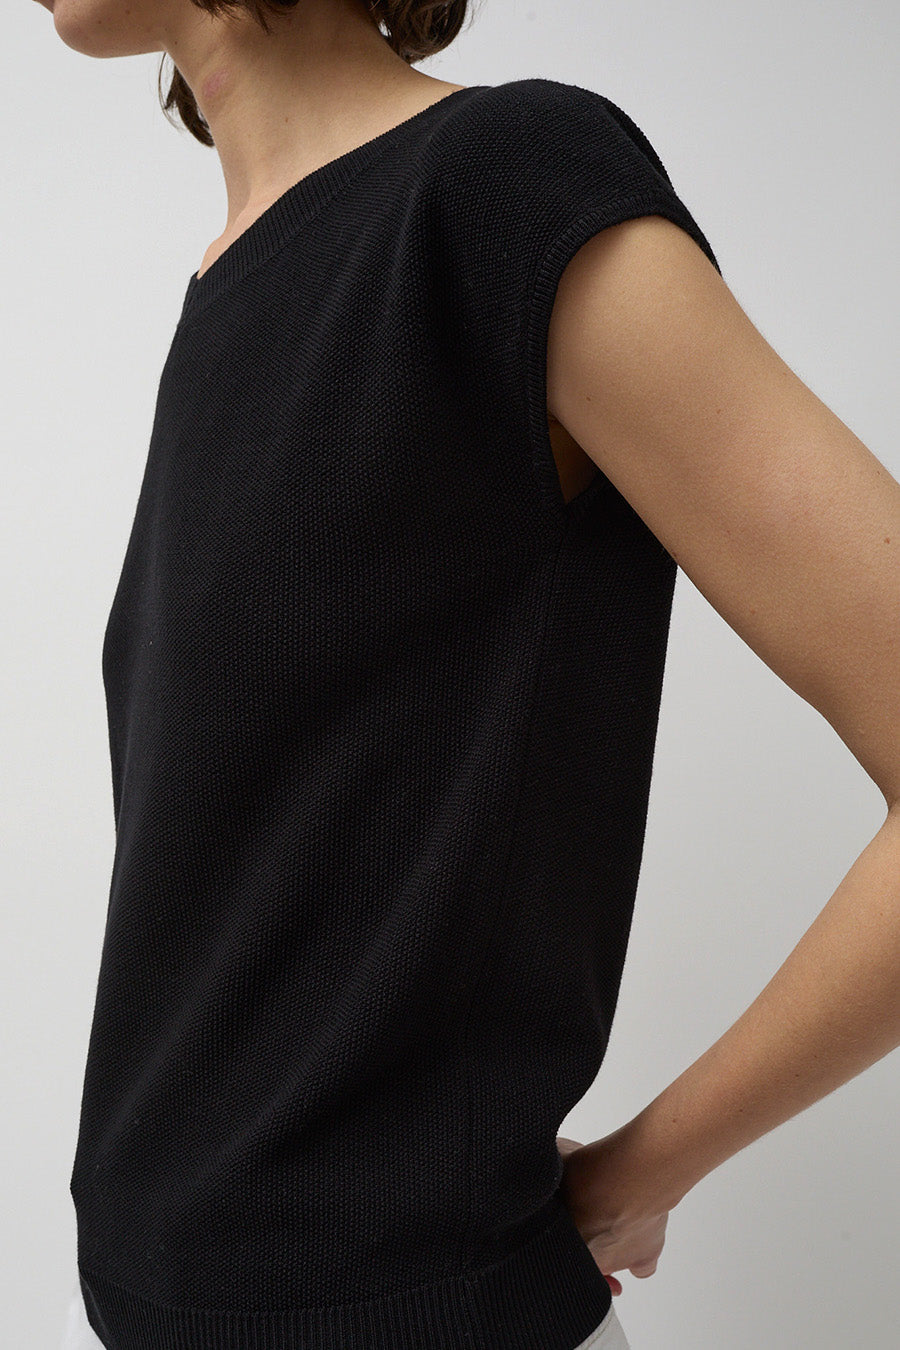 Rue Blanche Bees Short Sleeve Top in Black